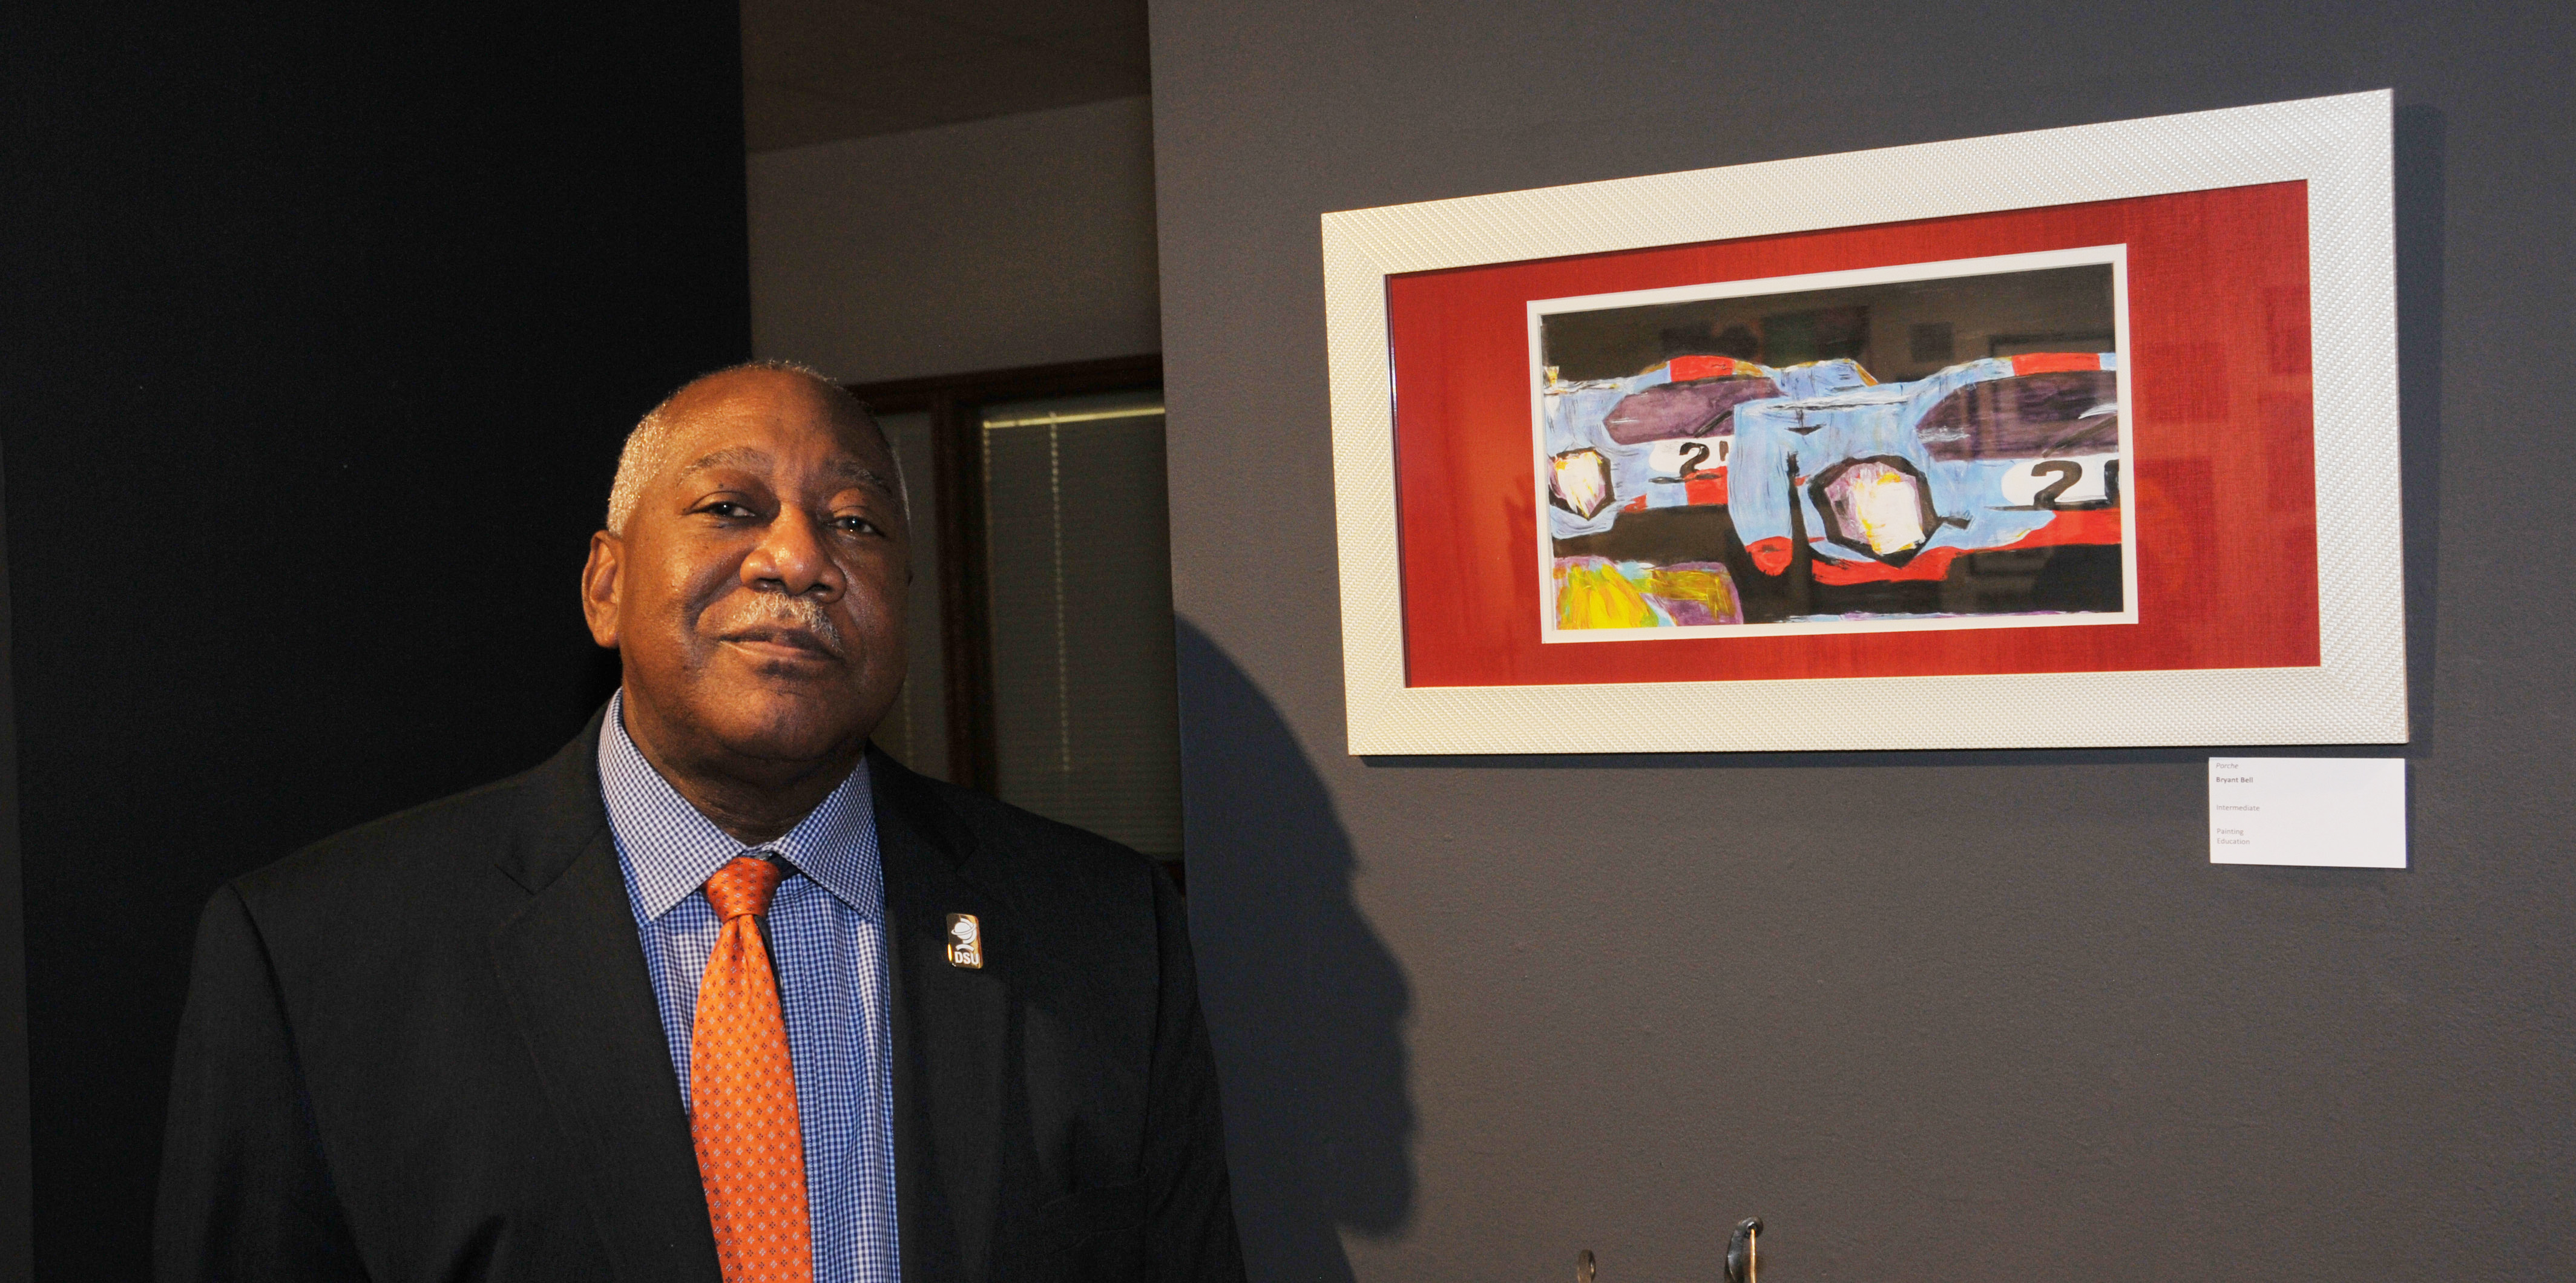 State Employee Art Exhibition at DSU until March 13